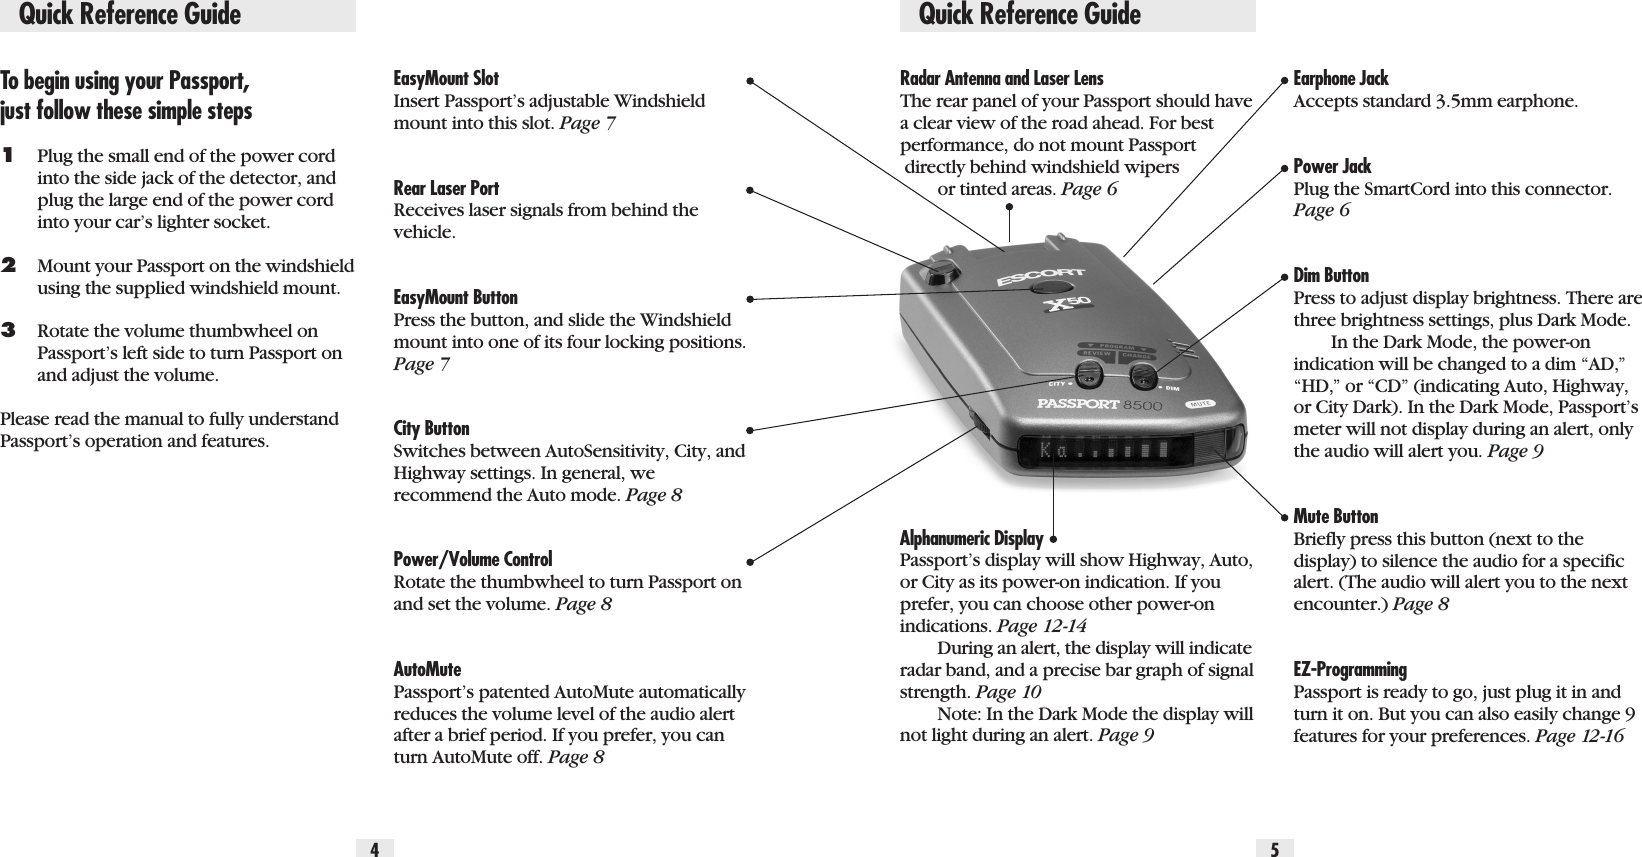 Quick Reference GuideTo begin using your Passport, just follow these simple steps1Plug the small end of the power cord into the side jack of the detector, and plug the large end of the power cord into your car’s lighter socket.2Mount your Passport on the windshieldusing the supplied windshield mount.3Rotate the volume thumbwheel on Passport’s left side to turn Passport on and adjust the volume.Please read the manual to fully understandPassport’s operation and features.EasyMount Slot Insert Passport’s adjustable Windshield mount into this slot. Page 7Rear Laser PortReceives laser signals from behind thevehicle.EasyMount ButtonPress the button, and slide the Windshieldmount into one of its four locking positions.Page 7City ButtonSwitches between AutoSensitivity, City, andHighway settings. In general, we recommend the Auto mode. Page 8Power/Volume ControlRotate the thumbwheel to turn Passport onand set the volume. Page 8AutoMutePassport’s patented AutoMute automaticallyreduces the volume level of the audio alertafter a brief period. If you prefer, you canturn AutoMute off. Page 8Radar Antenna and Laser LensThe rear panel of your Passport should havea clear view of the road ahead. For bestperformance, do not mount Passport directly behind windshield wipers or tinted areas. Page 6Alphanumeric DisplayPassport’s display will show Highway, Auto,or City as its power-on indication. If youprefer, you can choose other power-on indications. Page 12-14During an alert, the display will indicateradar band, and a precise bar graph of signalstrength. Page 10Note: In the Dark Mode the display willnot light during an alert. Page 9Earphone JackAccepts standard 3.5mm earphone.Power Jack Plug the SmartCord into this connector.Page 6Dim Button Press to adjust display brightness. There arethree brightness settings, plus Dark Mode.In the Dark Mode, the power-onindication will be changed to a dim “AD,”“HD,” or “CD” (indicating Auto, Highway,or City Dark). In the Dark Mode, Passport’smeter will not display during an alert, onlythe audio will alert you. Page 9Mute Button Briefly press this button (next to thedisplay) to silence the audio for a specificalert. (The audio will alert you to the nextencounter.) Page 8EZ-ProgrammingPassport is ready to go, just plug it in andturn it on. But you can also easily change 9features for your preferences. Page 12-164 5Quick Reference Guide